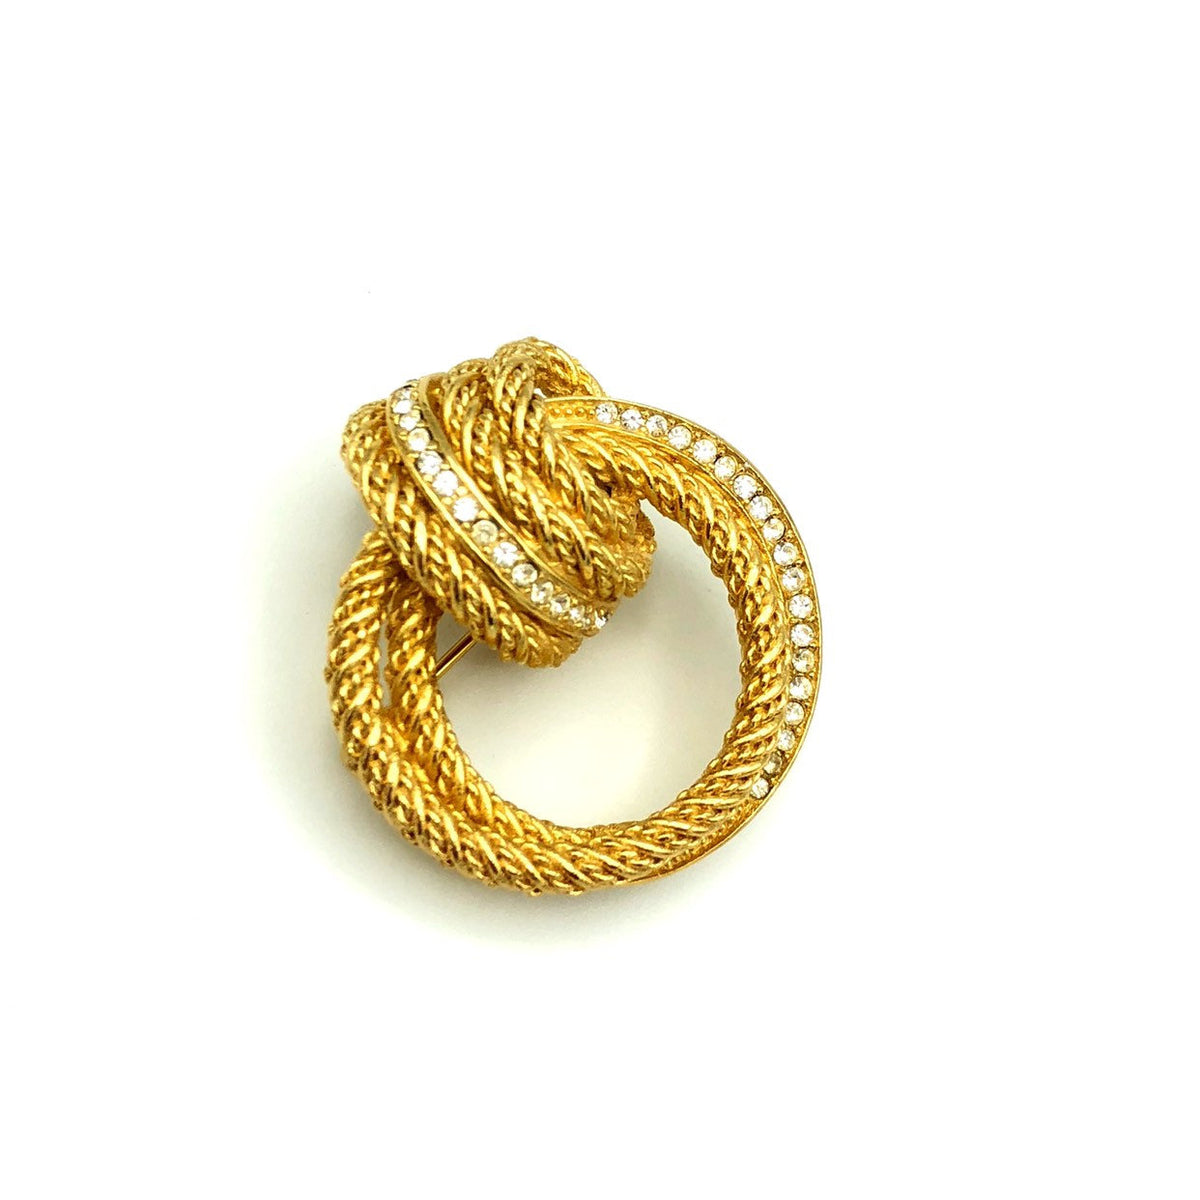 update alt-text with template Vintage Gold Christian Dior Circle Braided Brooch-Brooches & Pins-Christian Dior-[trending designer jewelry]-[christian dior jewelry]-[Sustainable Fashion]